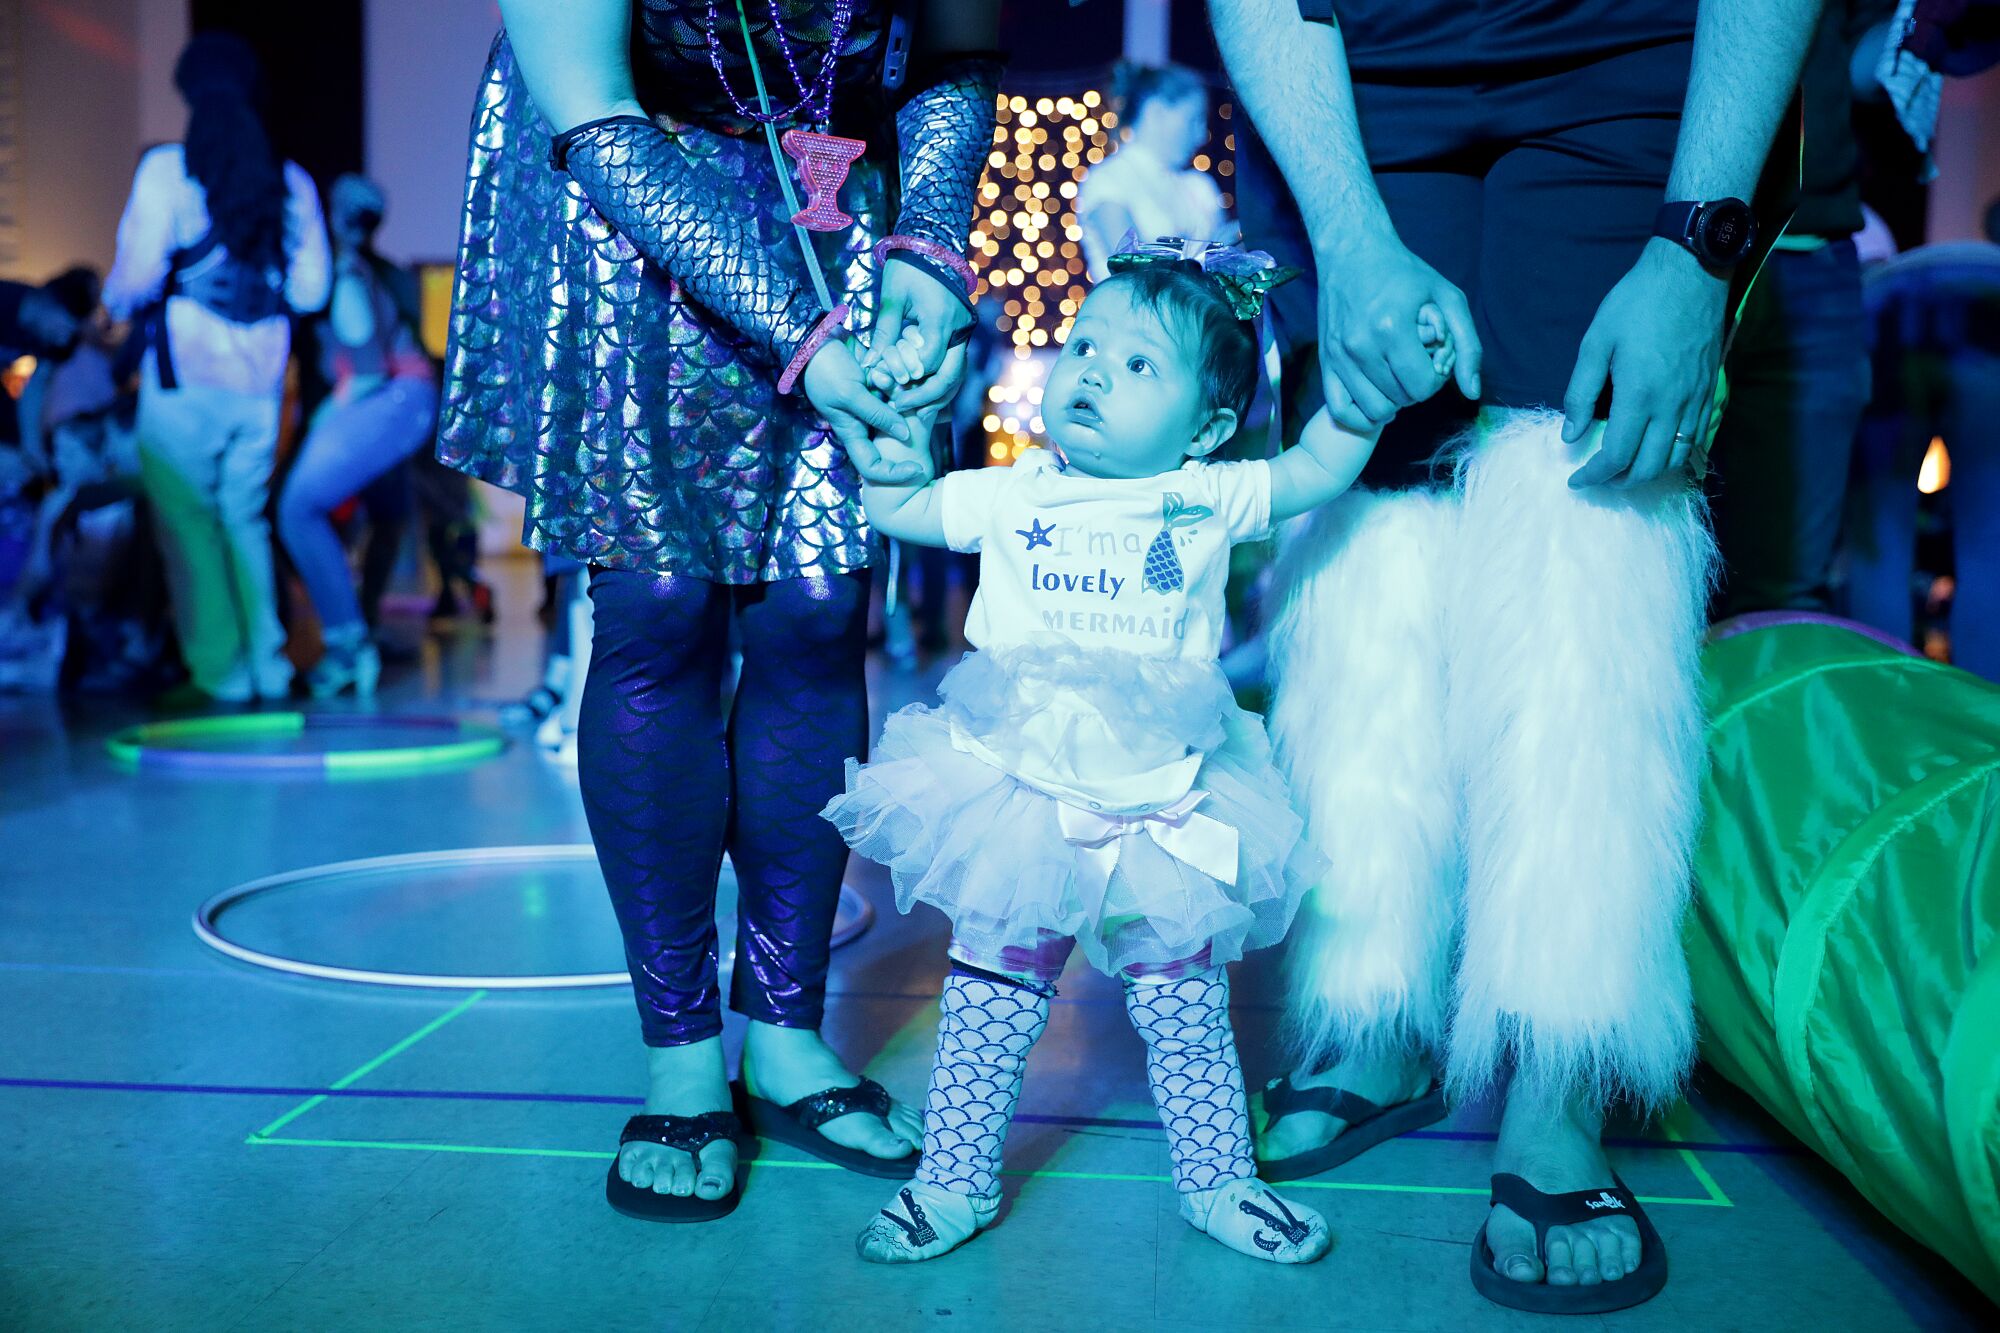 Ariel Harenburg and parents Carolyn Thamkul and Bryce Harenburg get into the club spirit at Baby Rave.